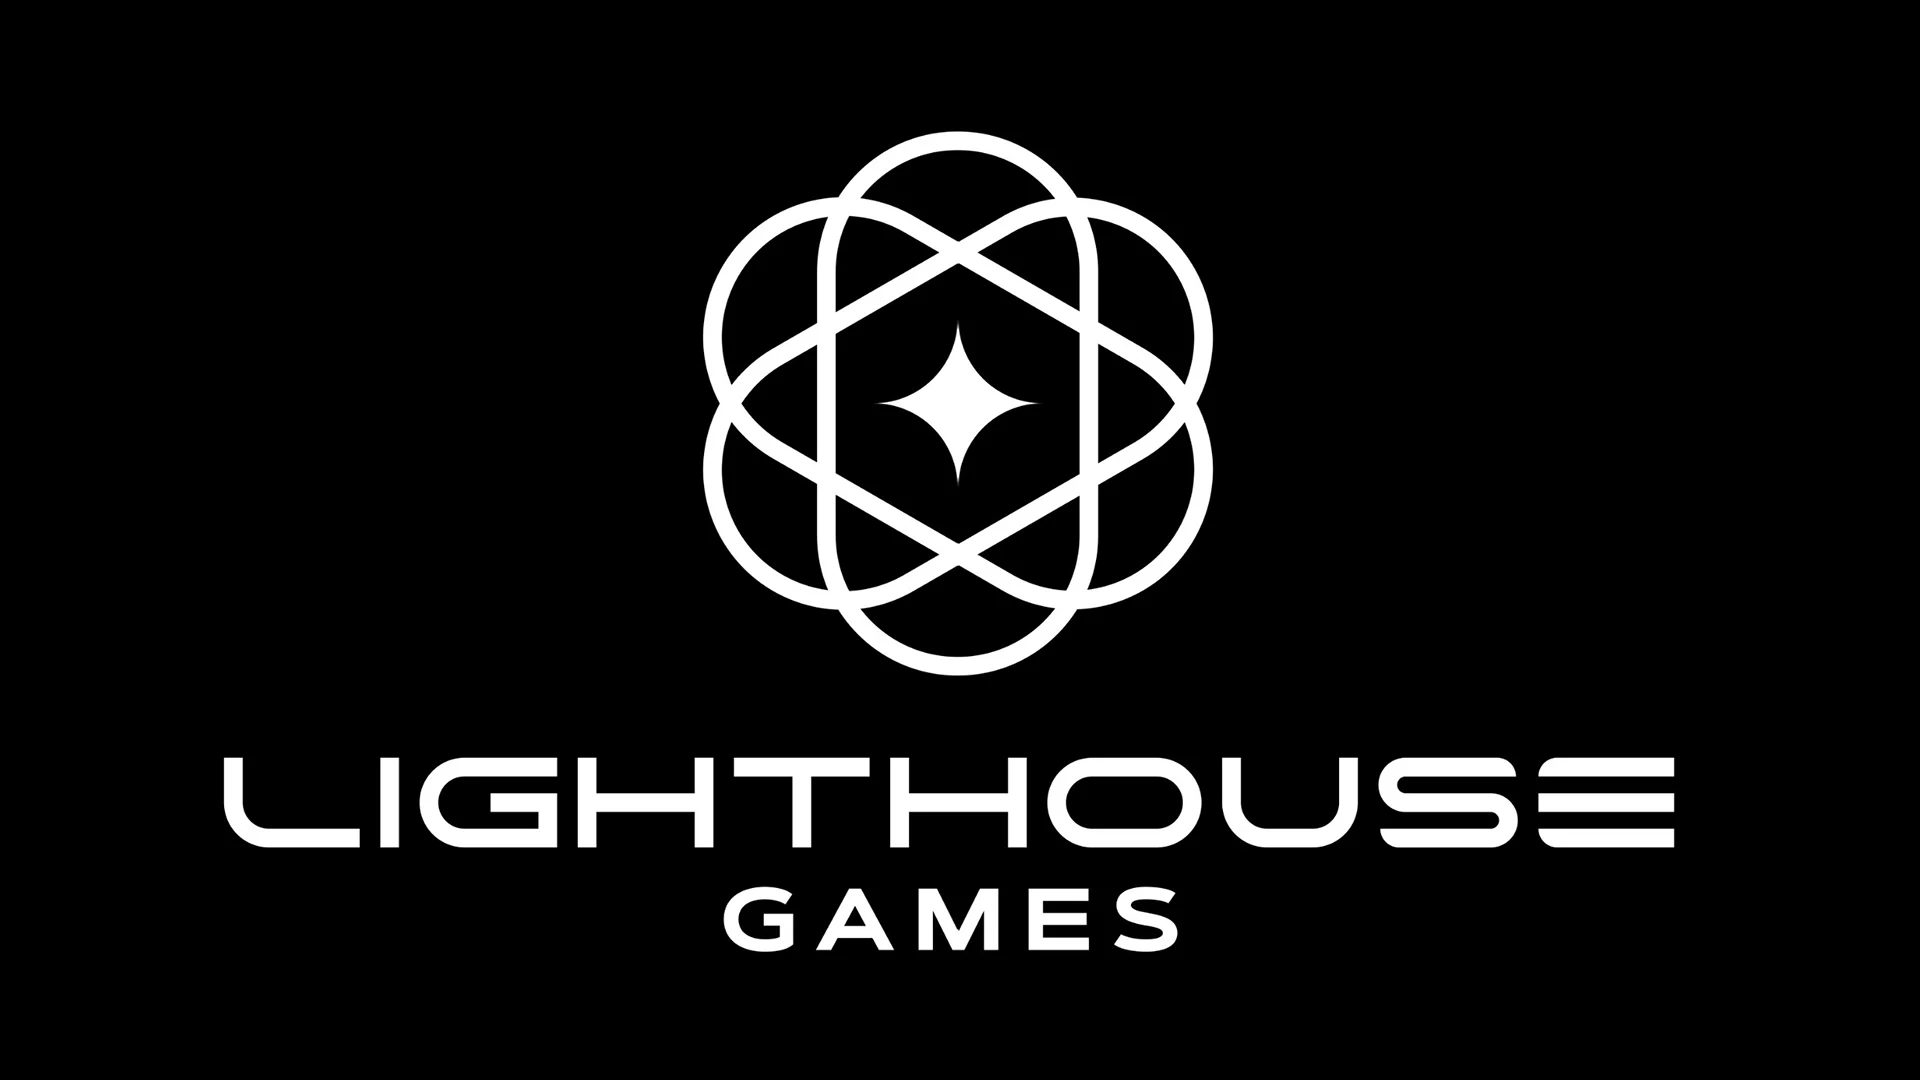 Lighthouse Games, the new studio of the Playground Games founder, has received a significant investment from China's Tencent